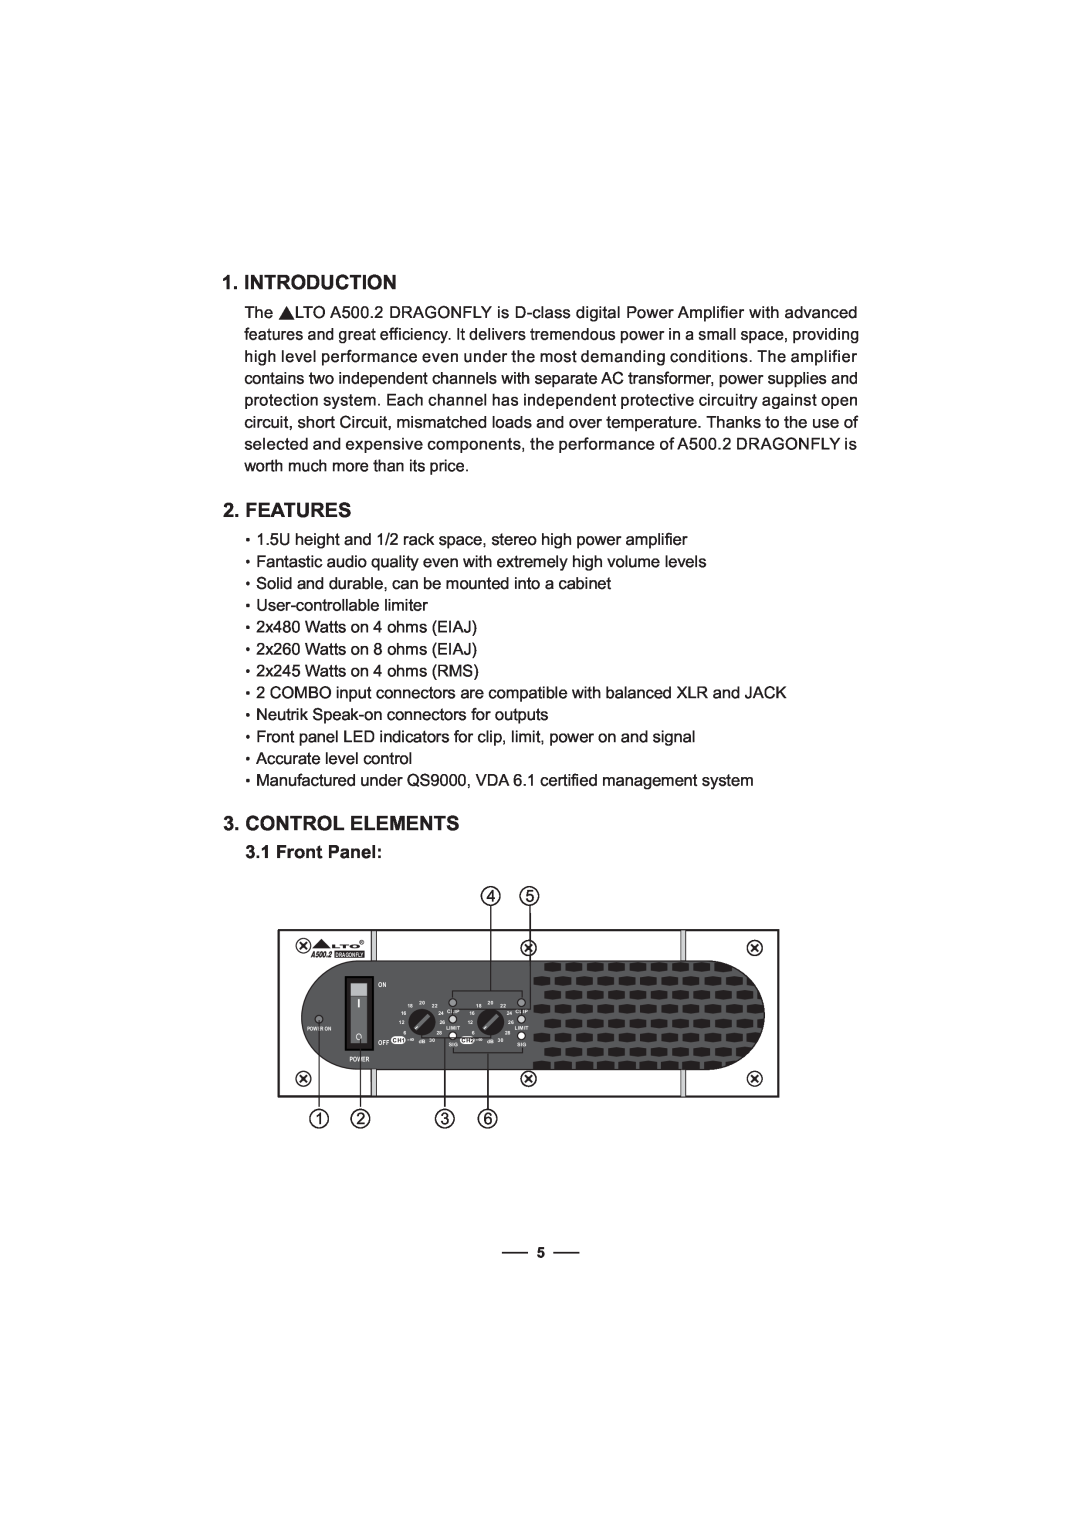 Nilfisk-ALTO A500.2 user manual Introduction, Features, Control Elements, Front Panel 